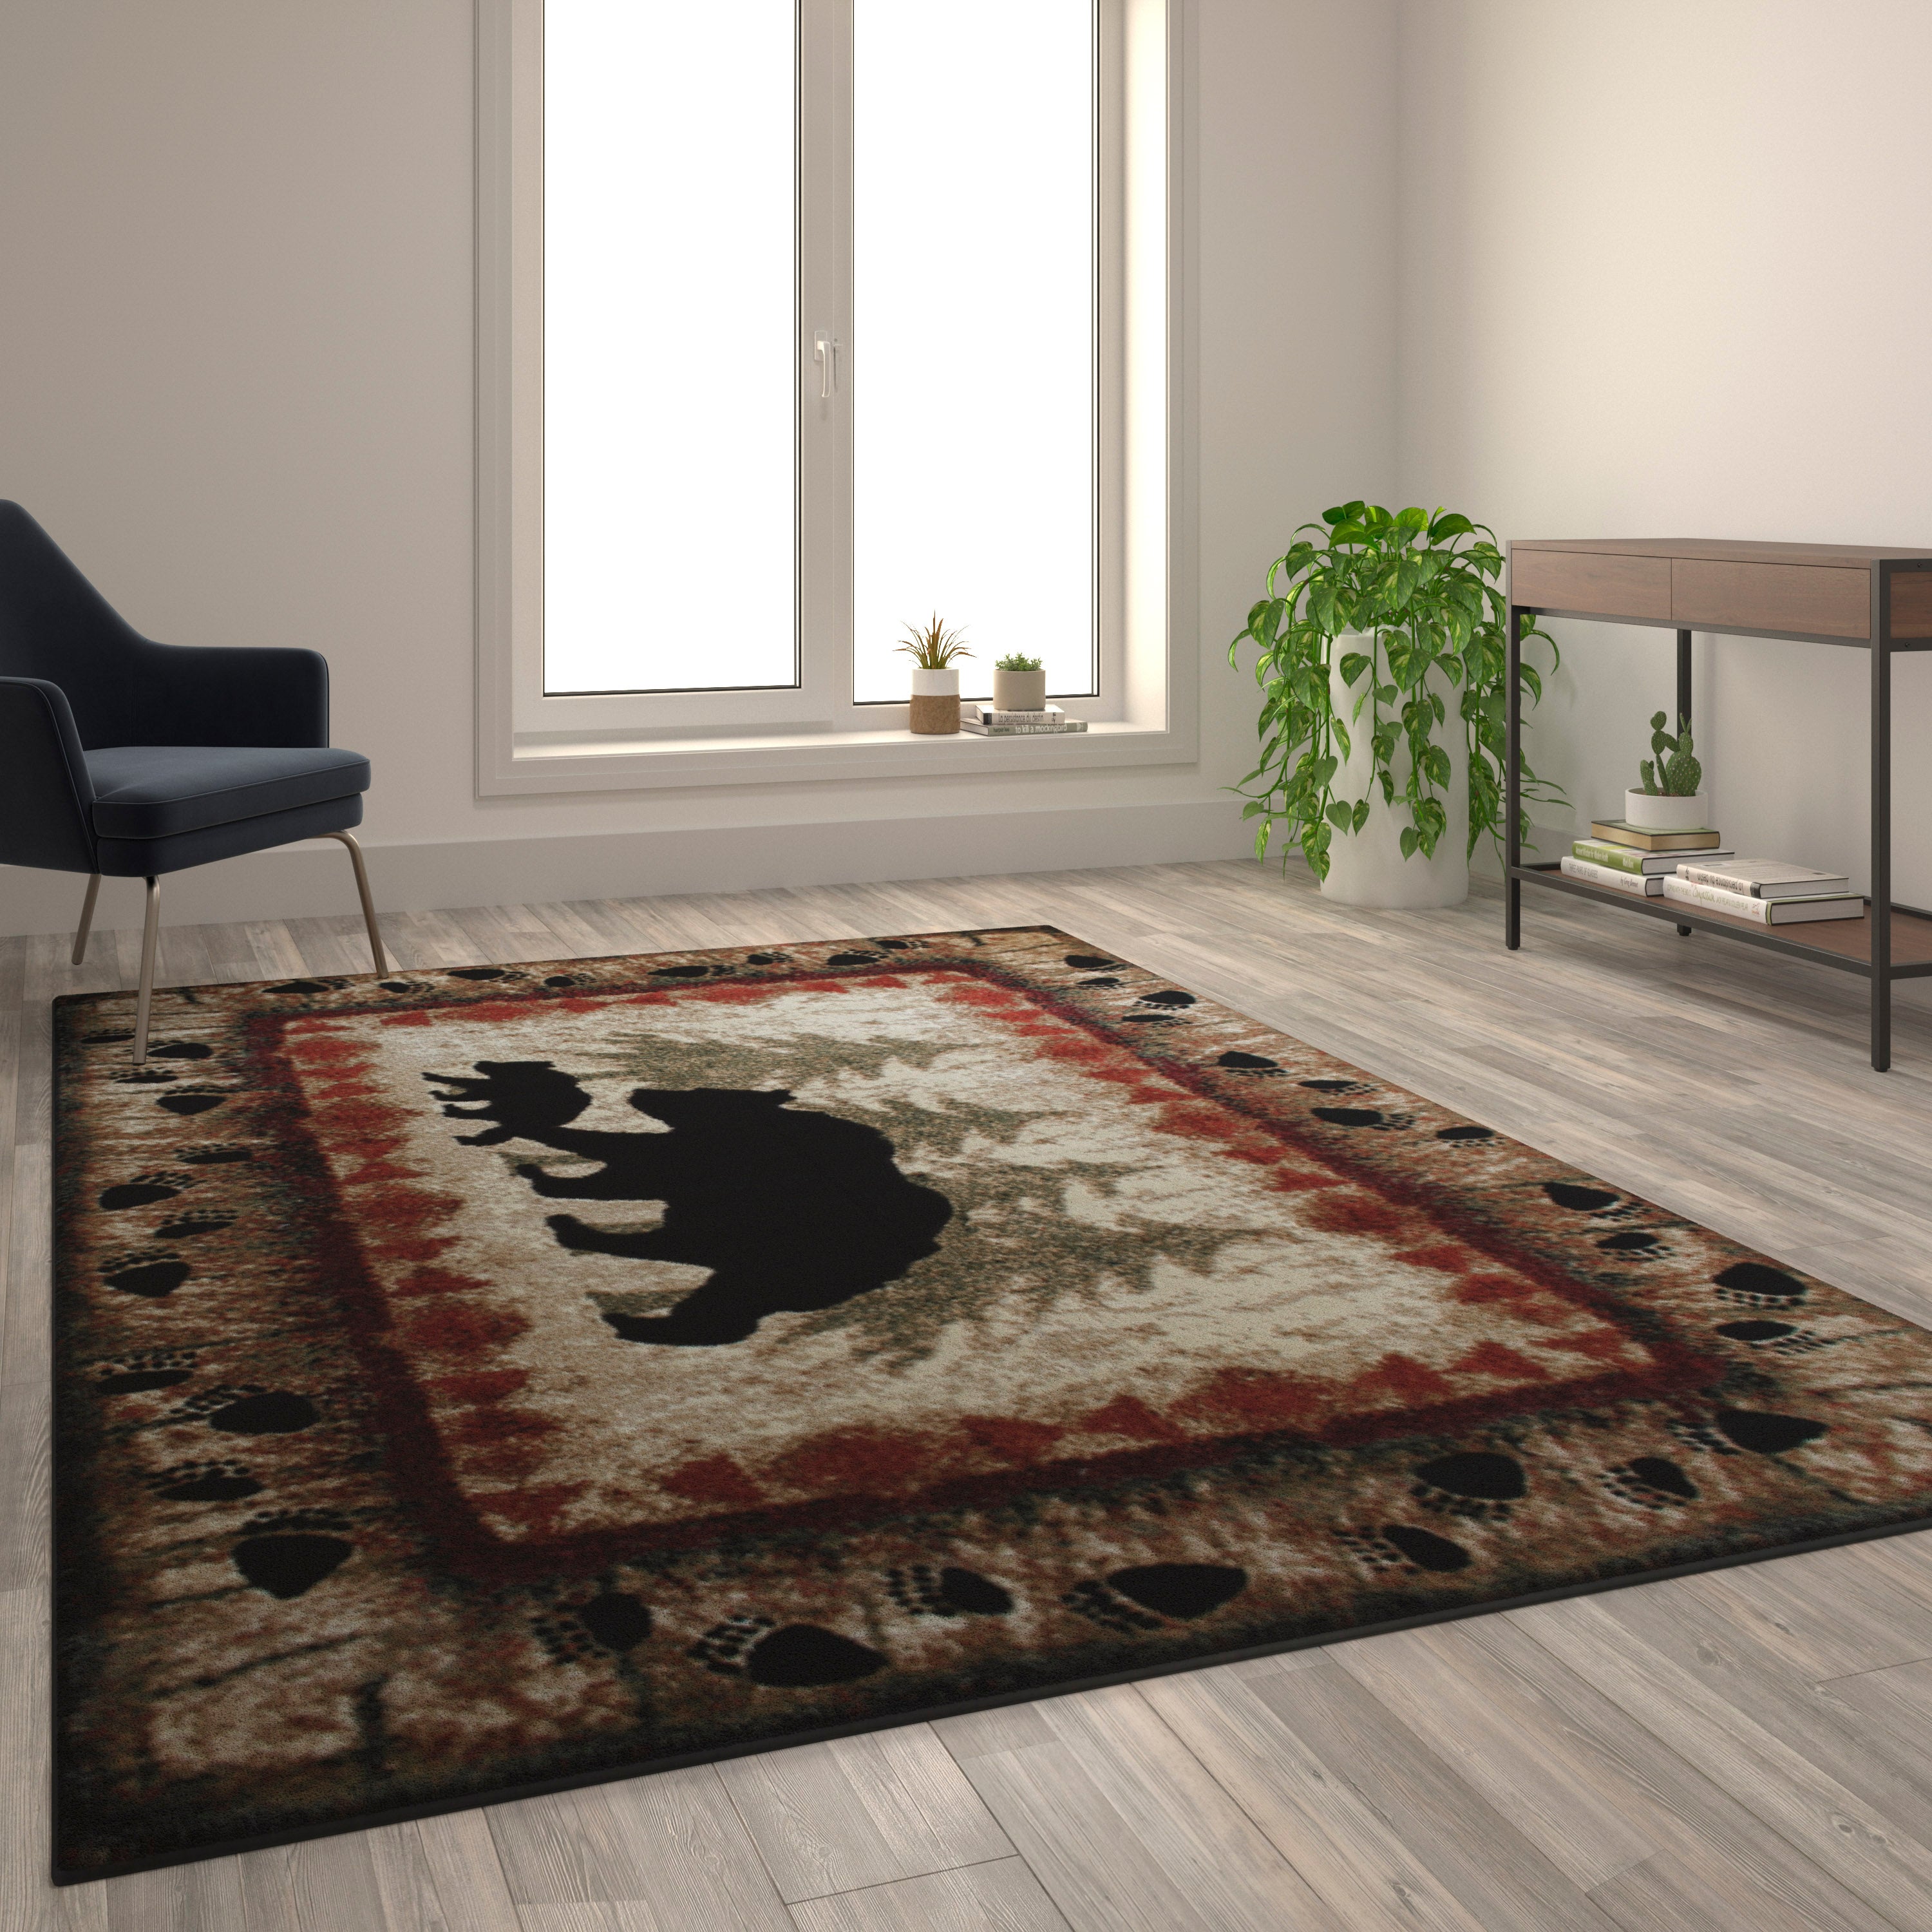 Ursus Collection Rustic Lodge Wandering Black Bear and Cub Area Rug with Jute Backing-Area Rug-Flash Furniture-Wall2Wall Furnishings